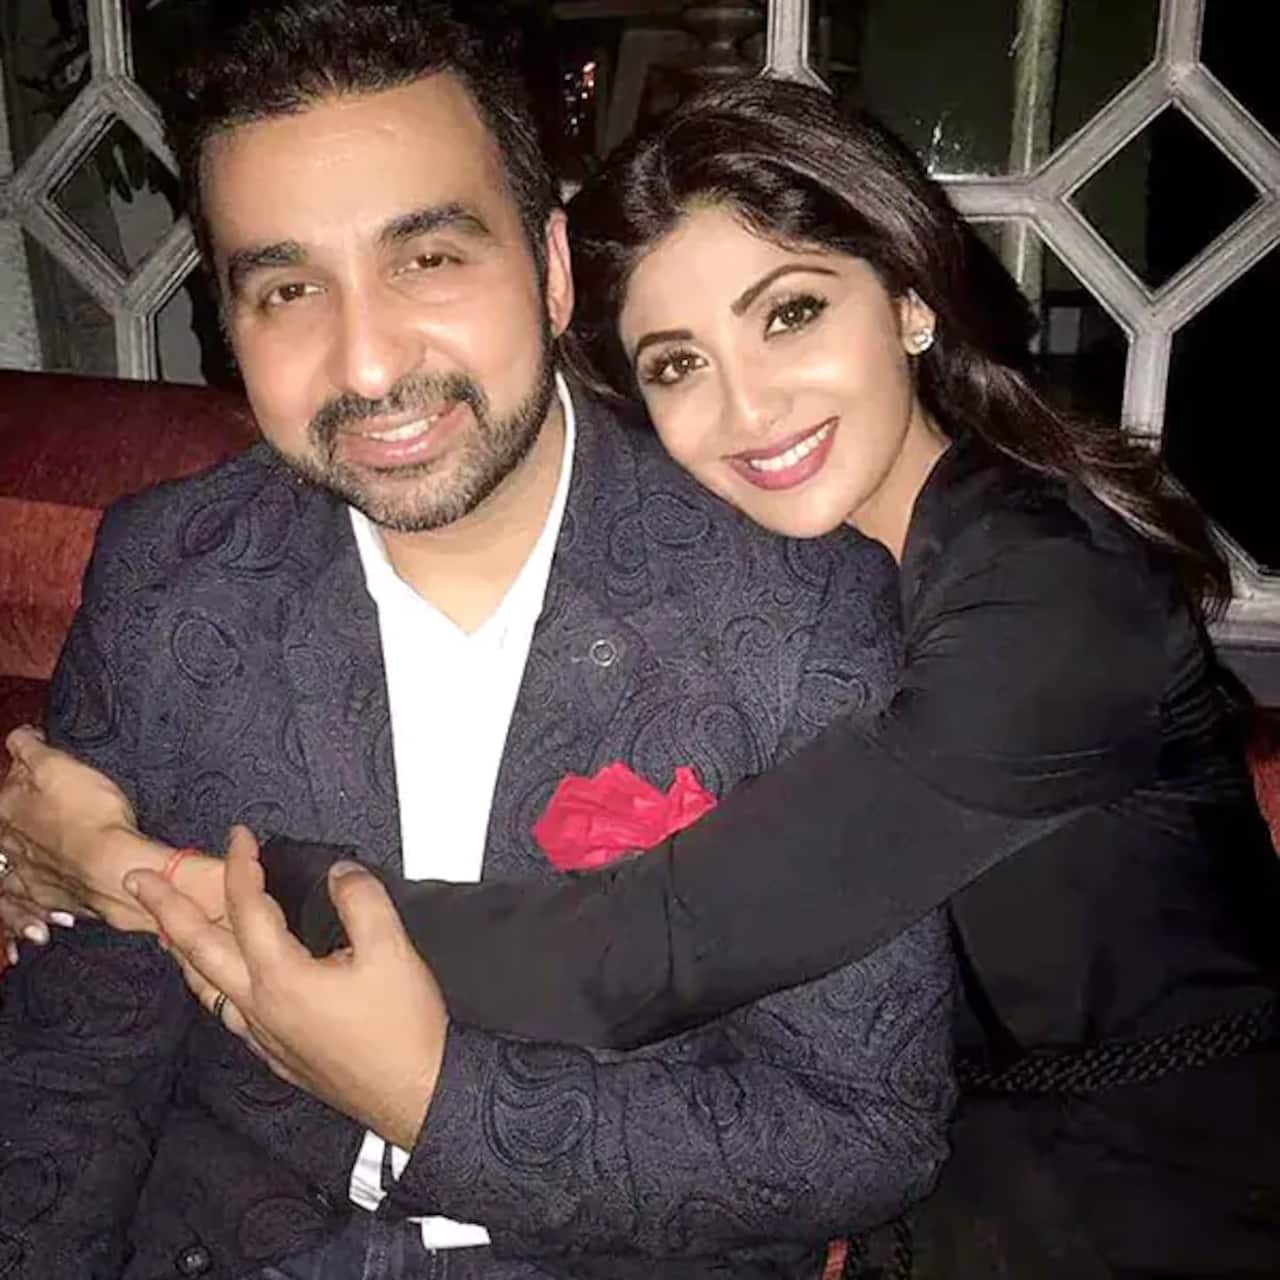 Raj Kundra pornography case: Shilpa Shetty's statement HINTS she has already moved on without her husband?